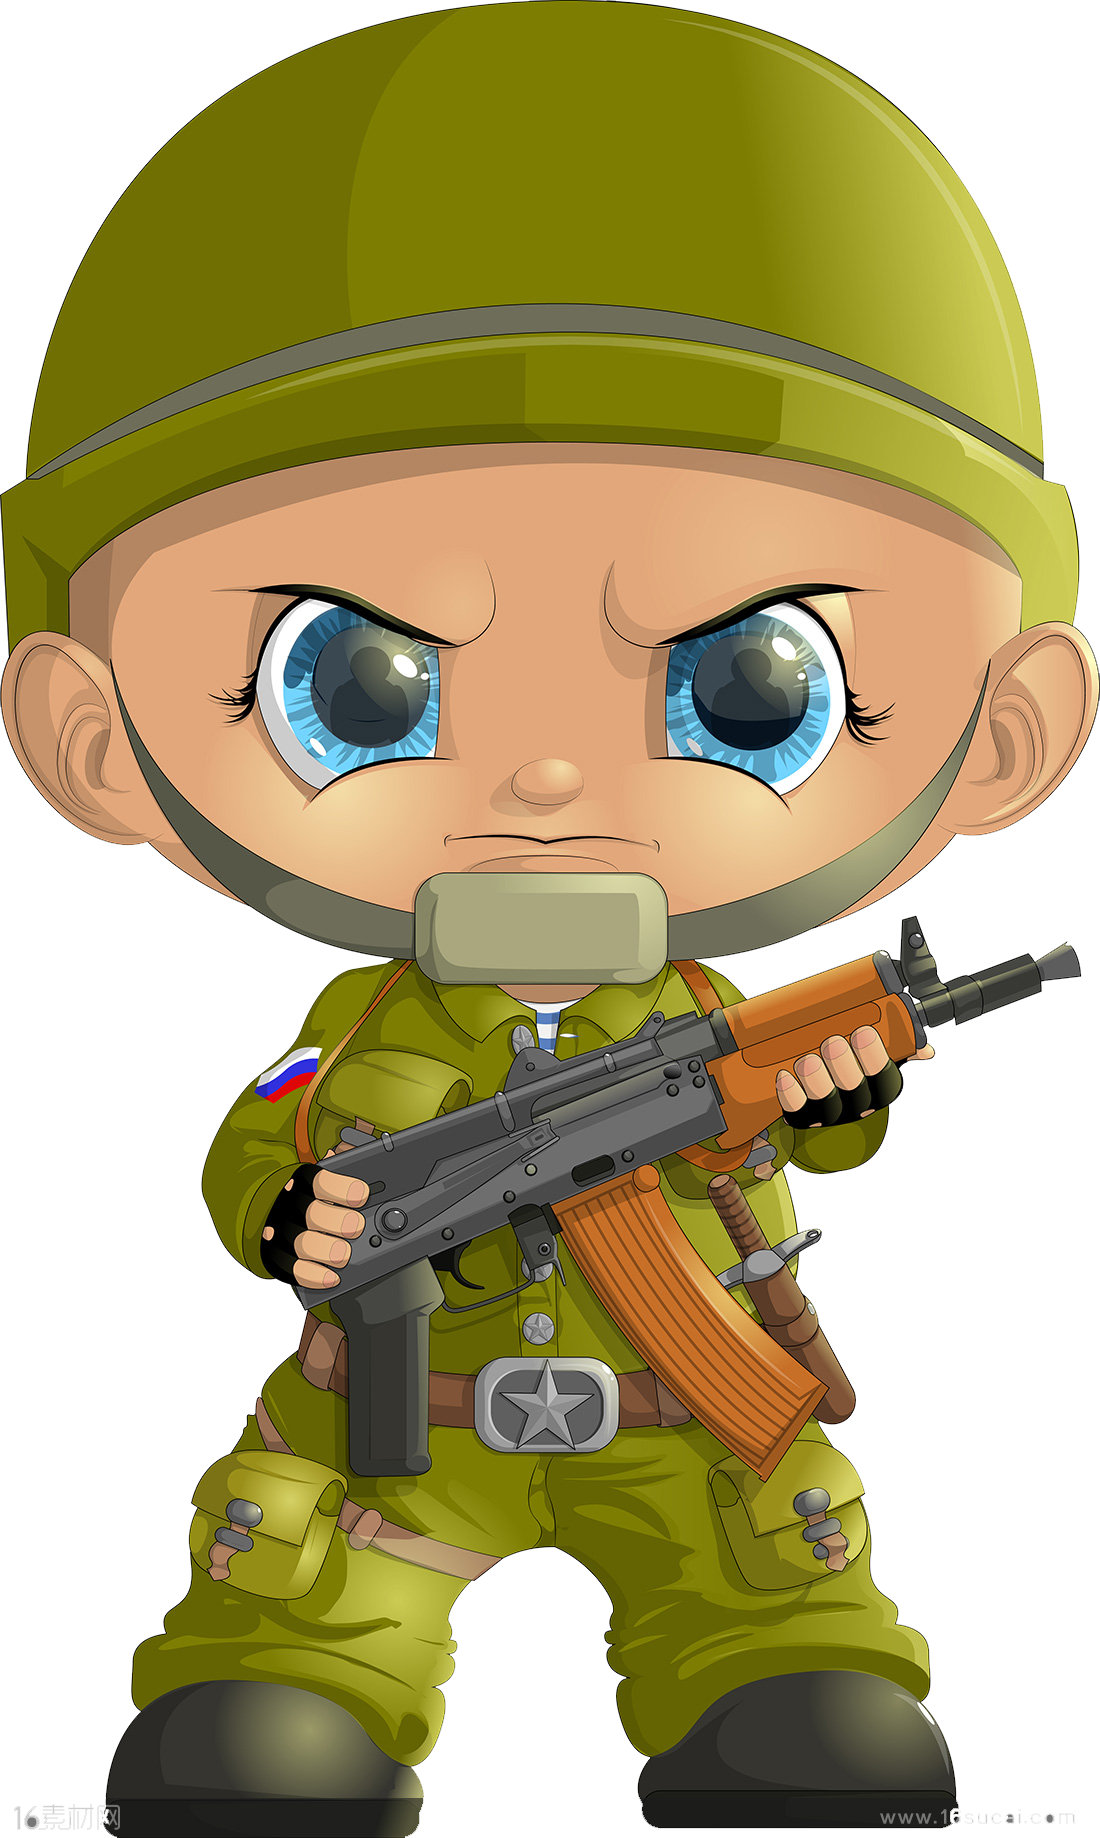 Soldier cartoon q version. Military clipart toy soldiers